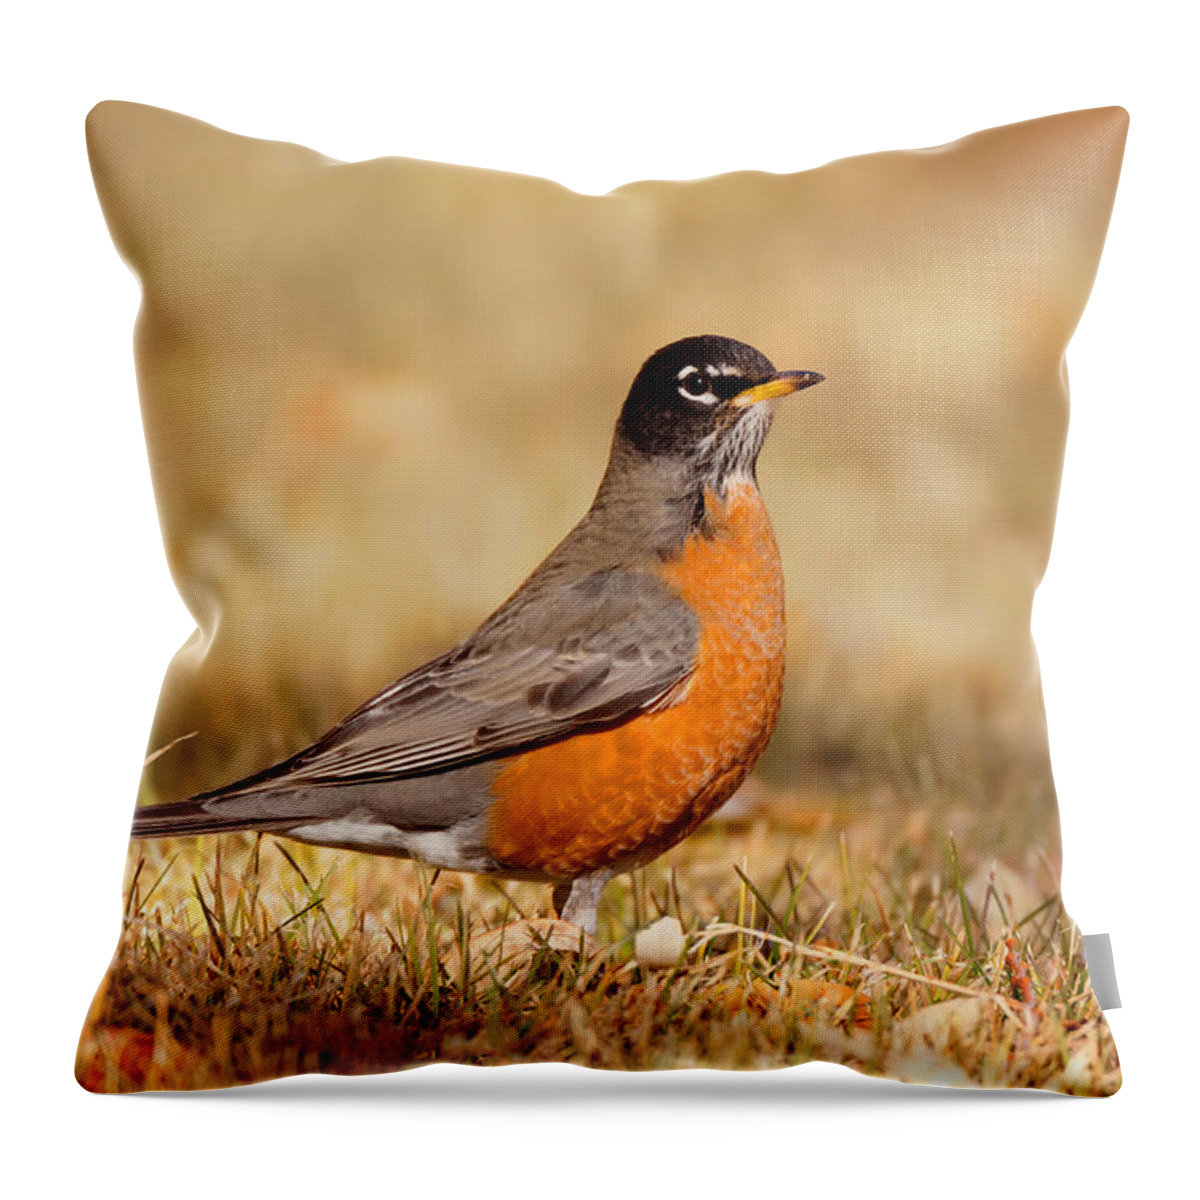 American Throw Pillow featuring the photograph American Robin by Ram Vasudev